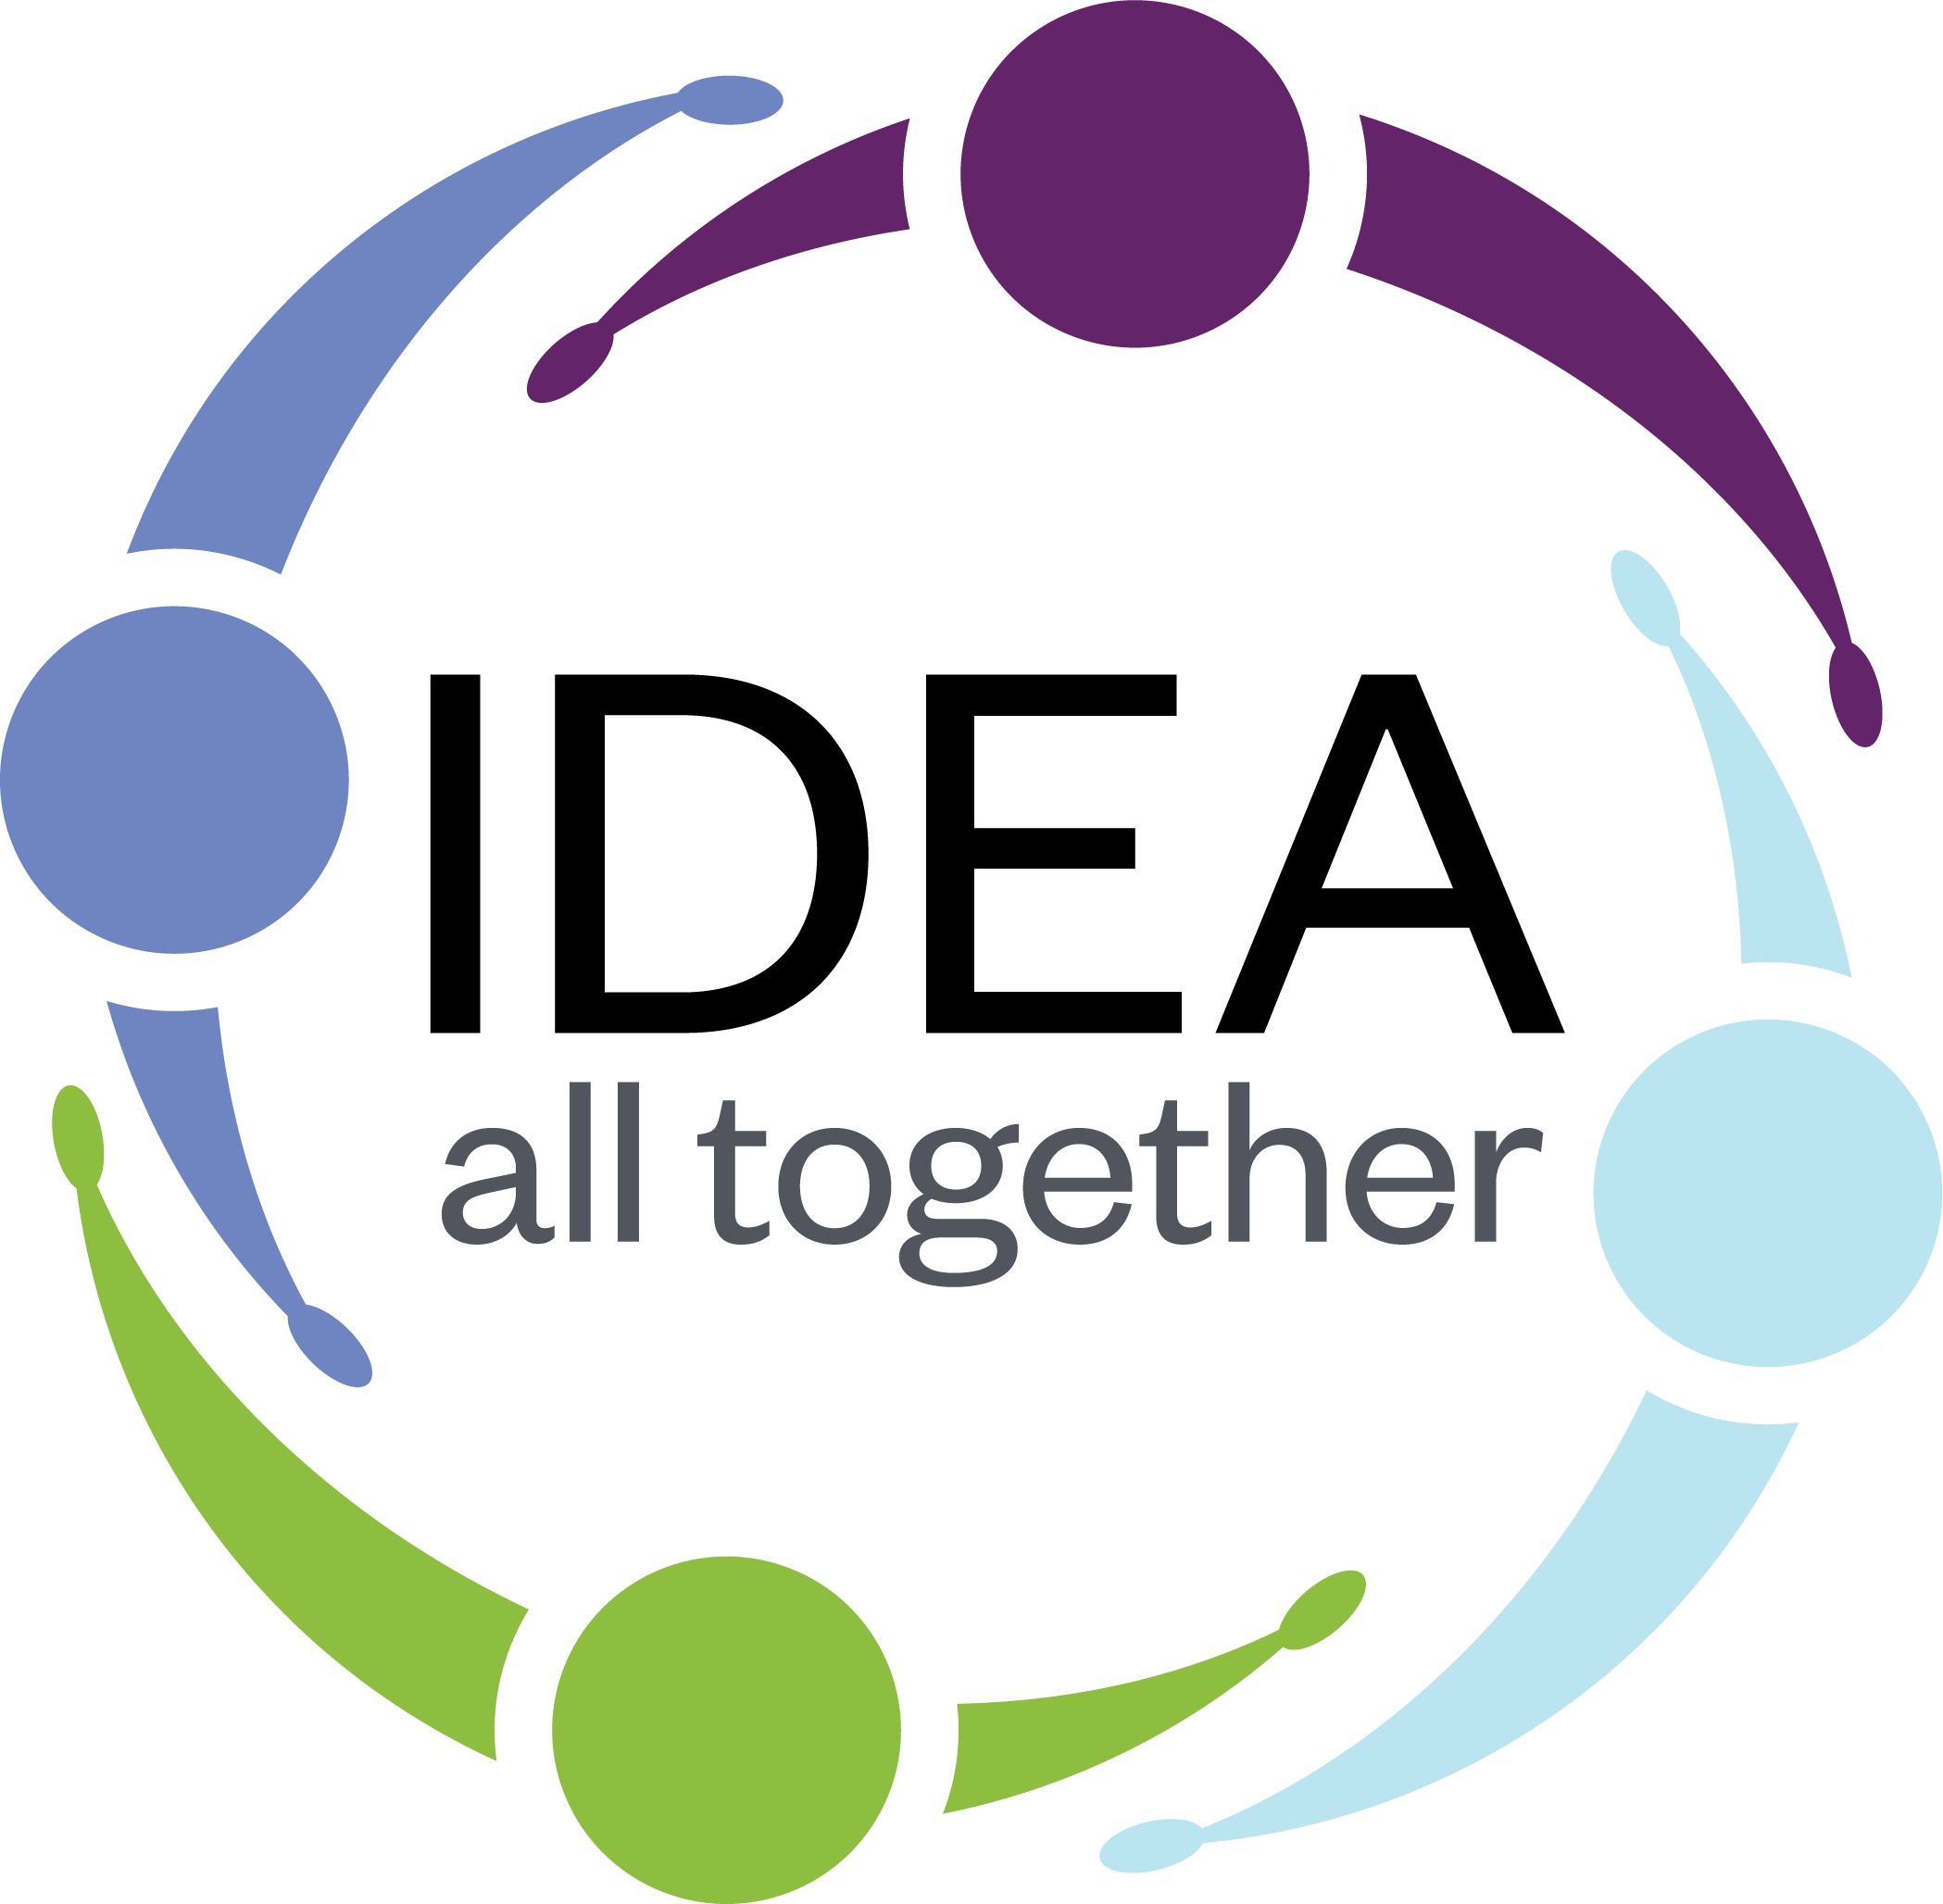 Abstract integration of shapes representing people (silhouettes) in a circle, with the text "IDEA, all together' in the center